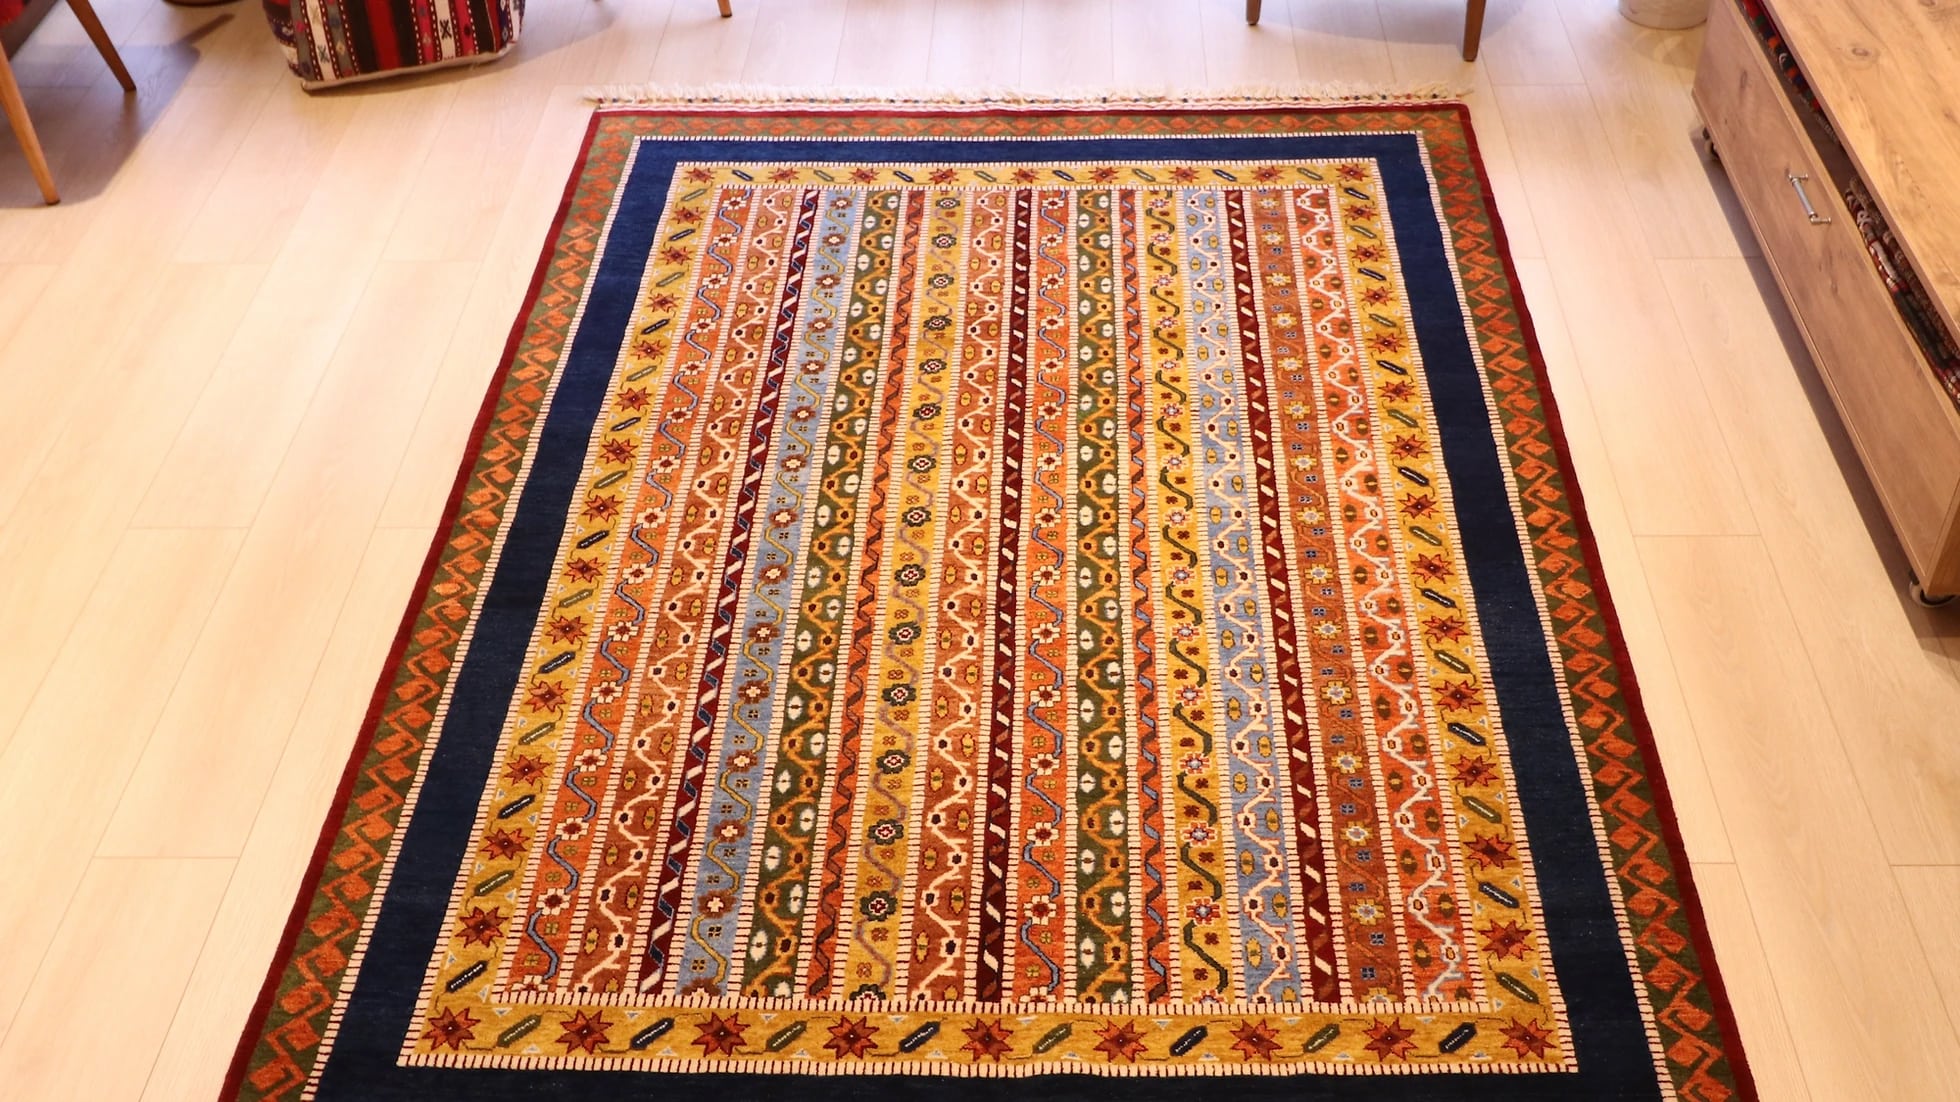 Turkish oriental ottoman palace style royal carpet in earthy tones with floral patterns